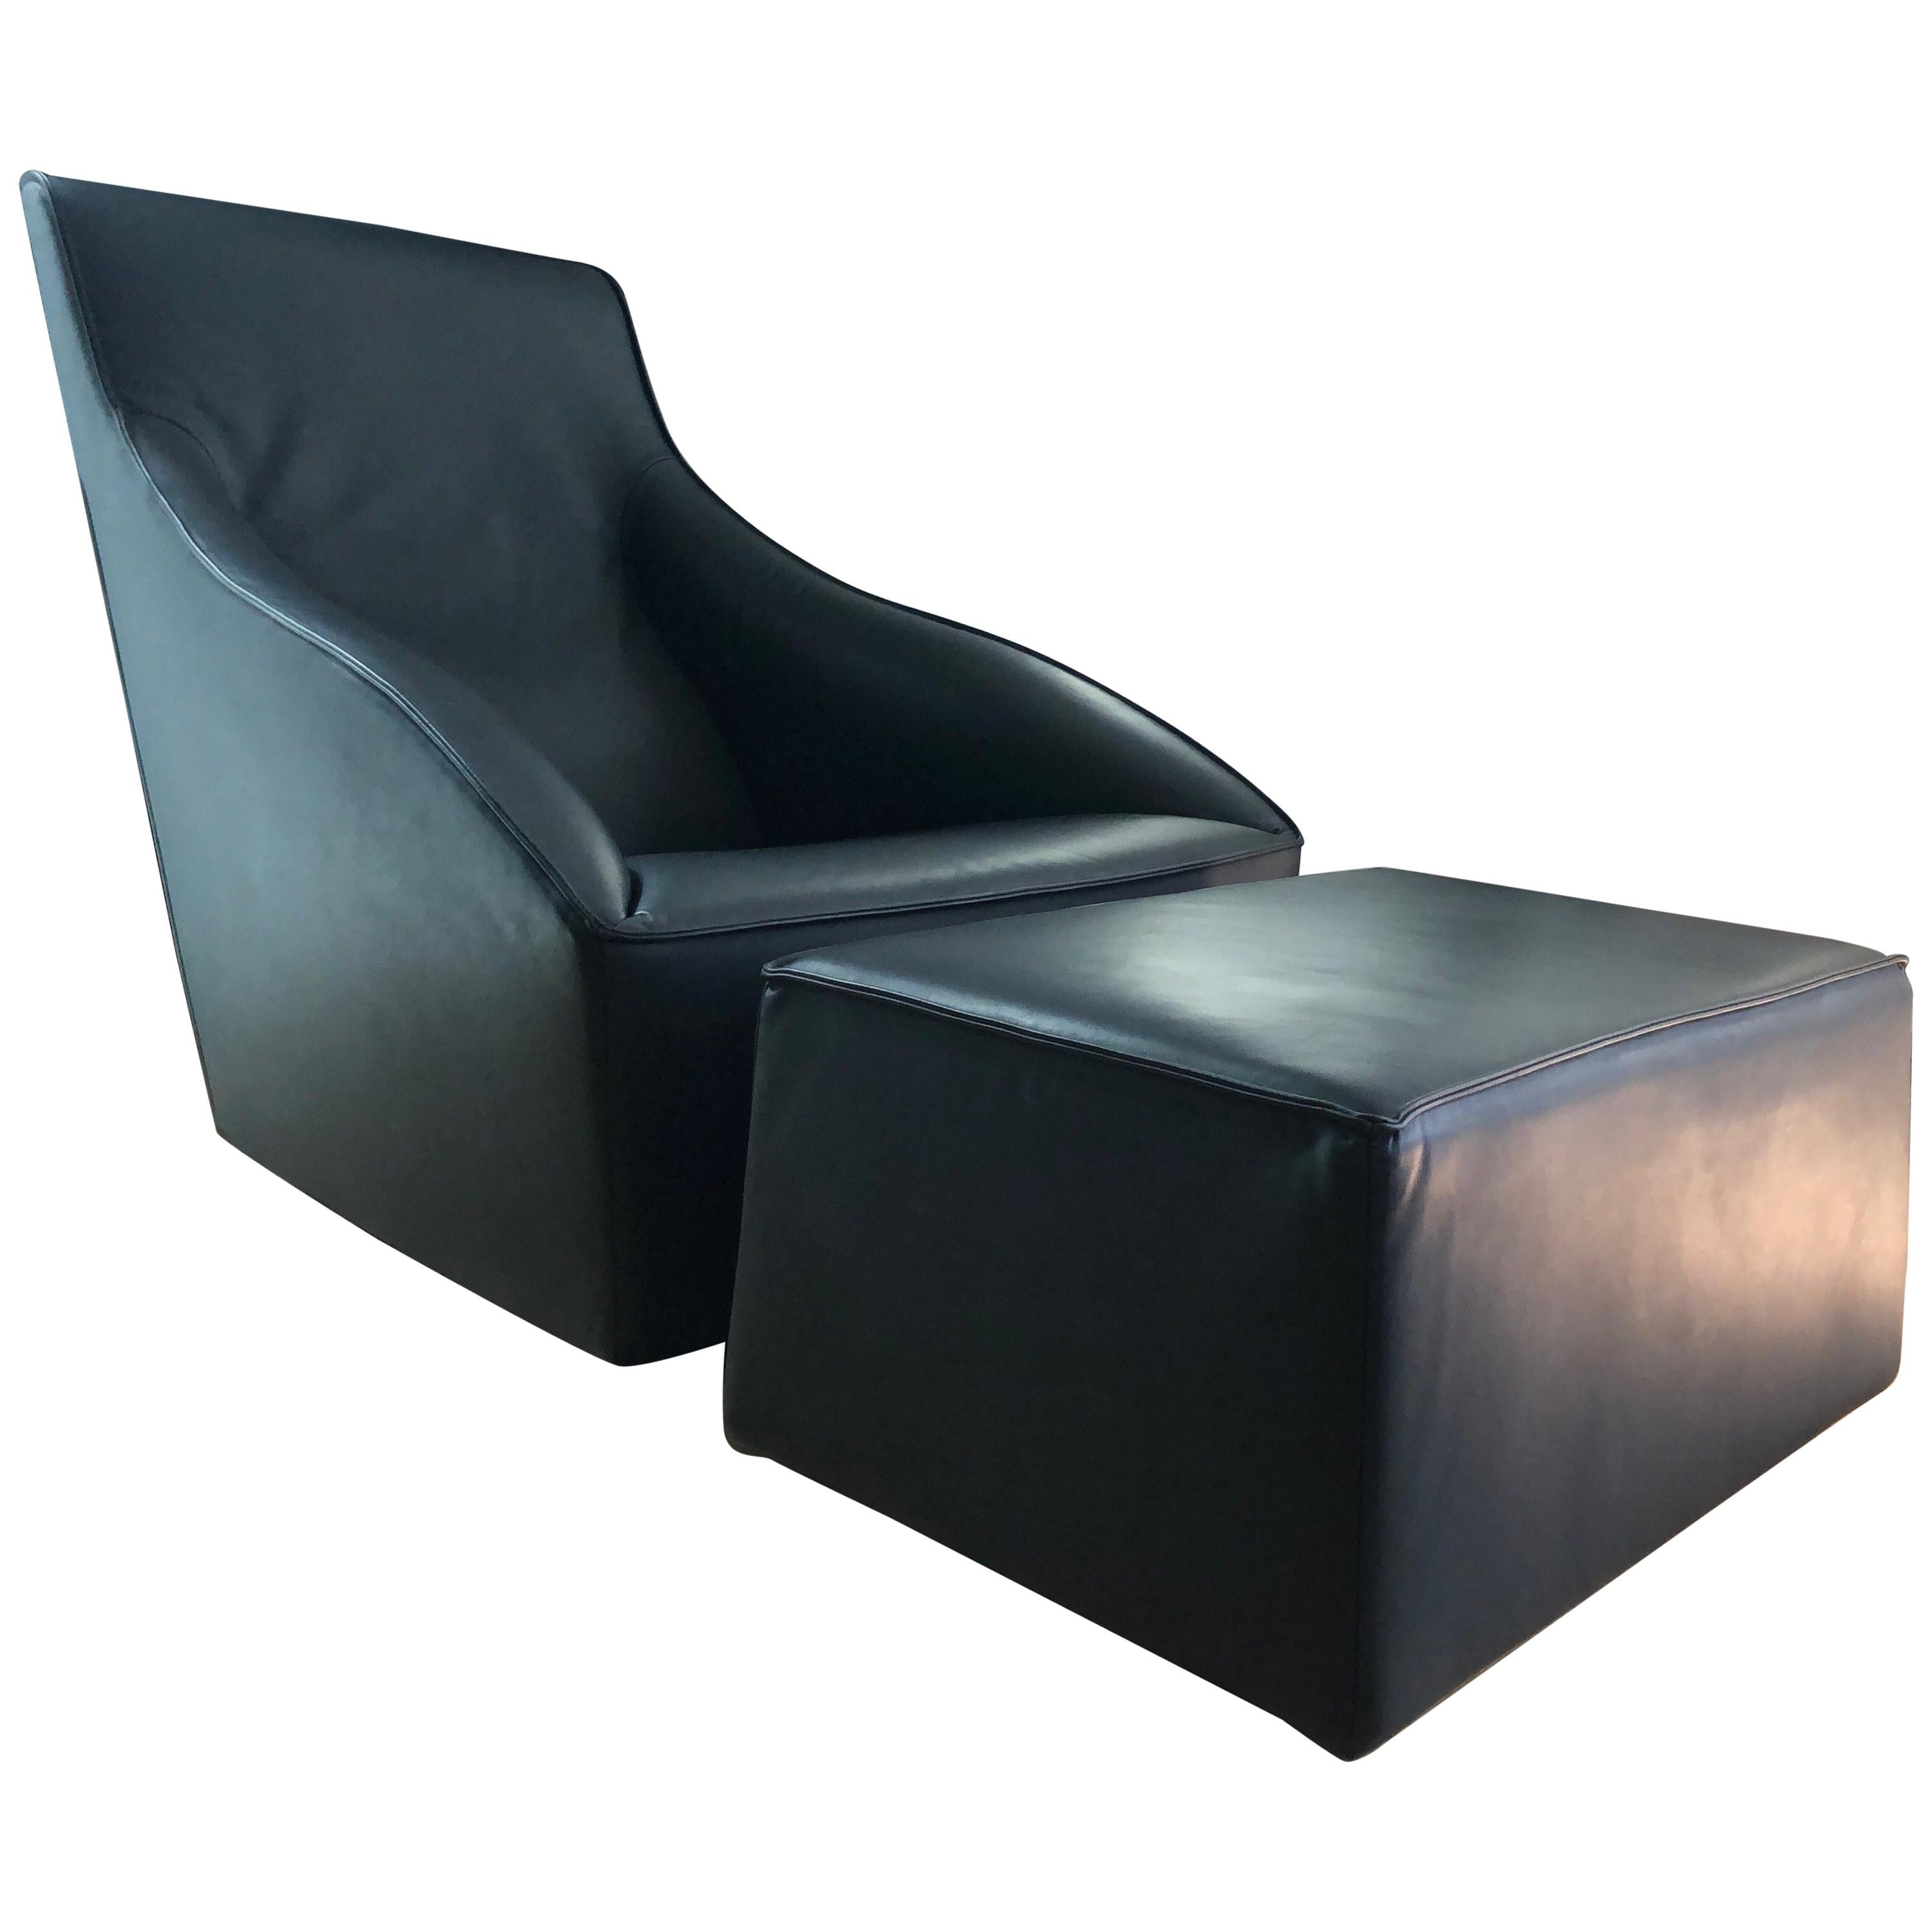 Molteni & C "Doda" Lounge Chair and Ottoman in Charcoal Leather For Sale